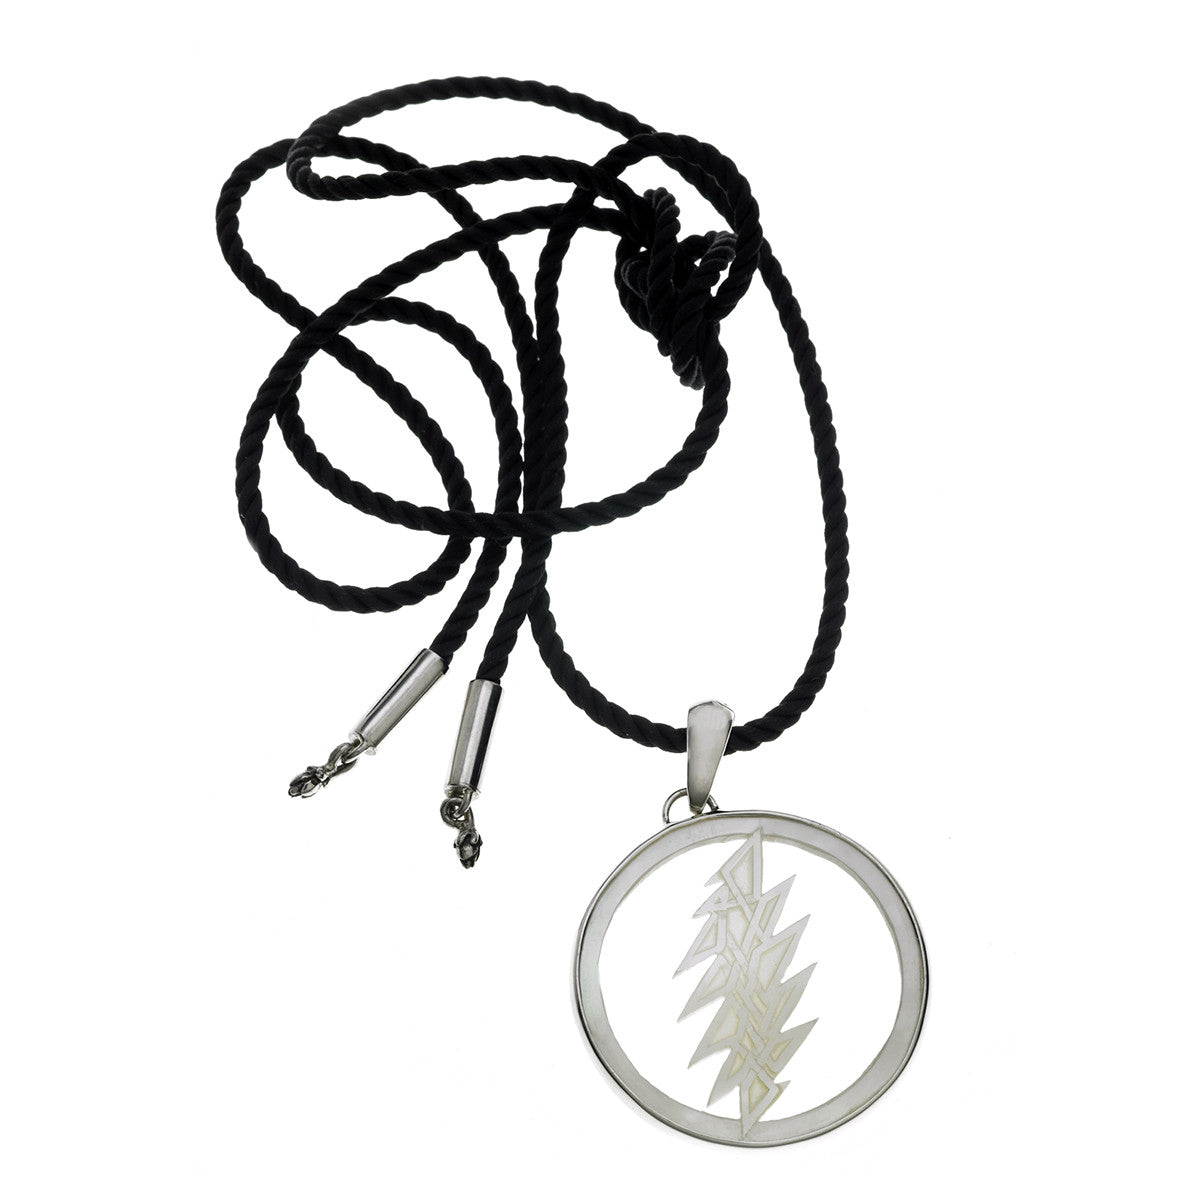 13 Point Lightening Bolt Sterling Silver Mother Of Pearl Cord Necklace - Cynthia Gale New York - 2